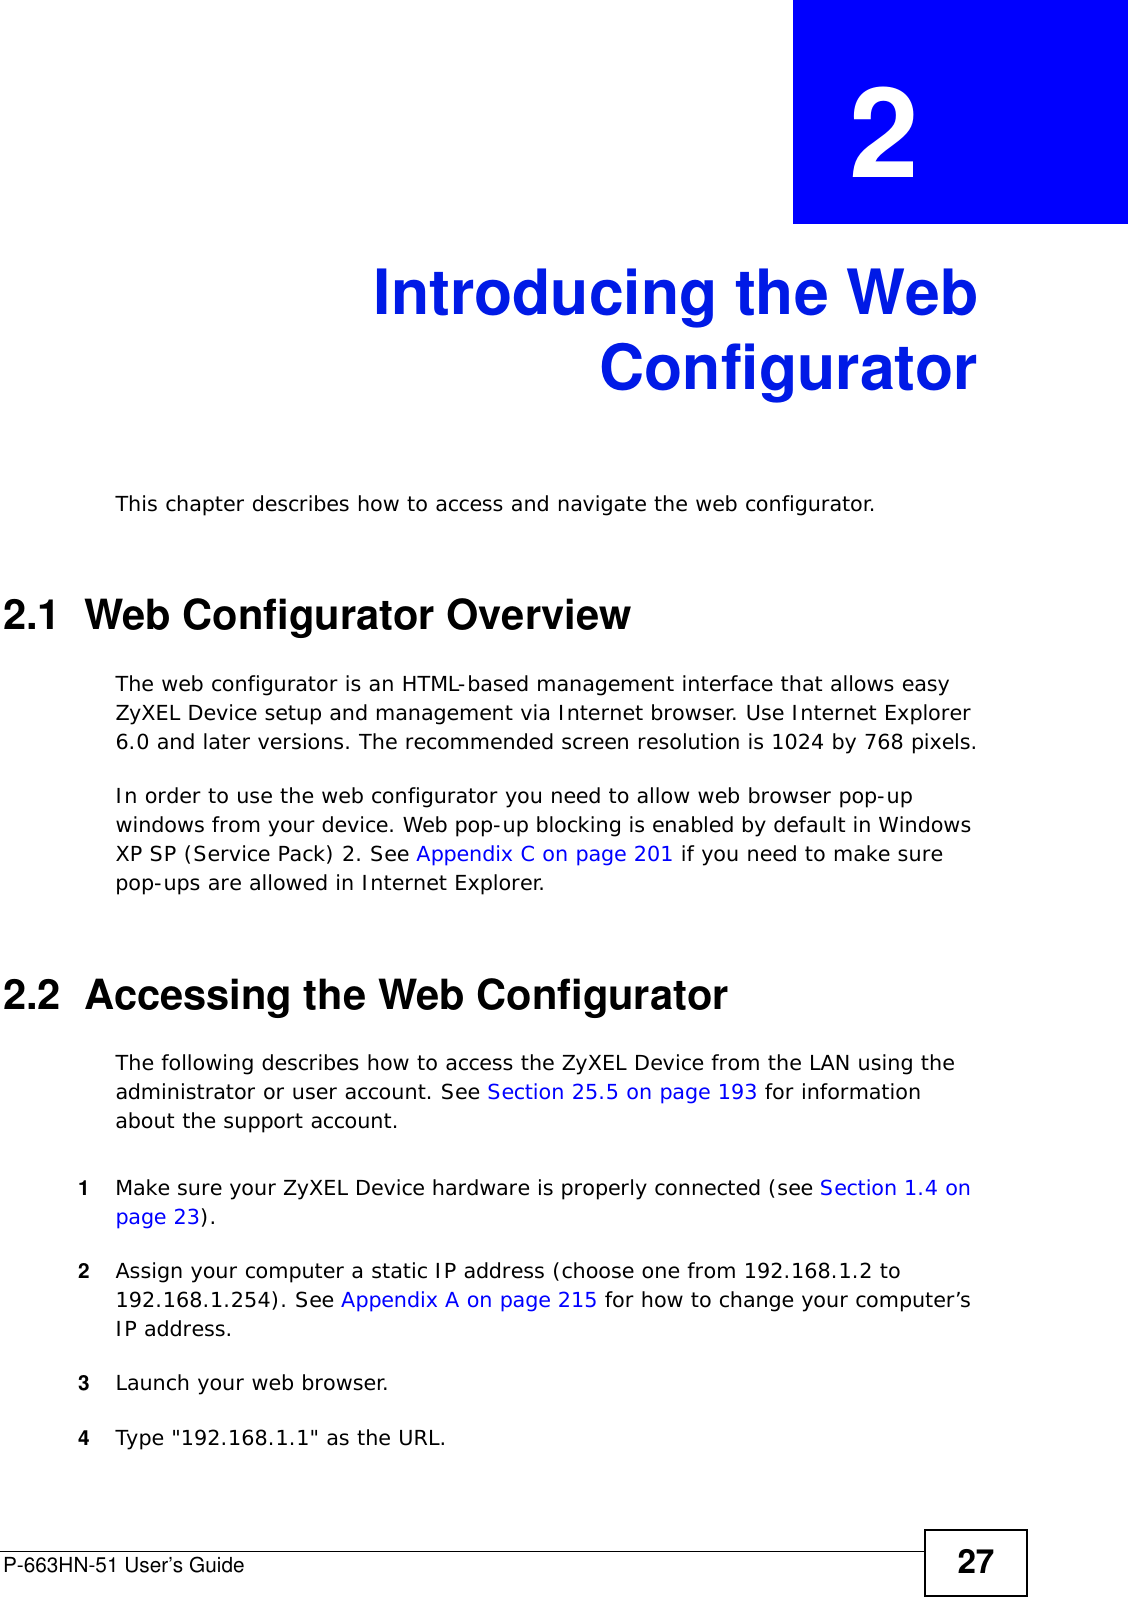 P-663HN-51 User’s Guide 27CHAPTER  2 Introducing the WebConfiguratorThis chapter describes how to access and navigate the web configurator.2.1  Web Configurator OverviewThe web configurator is an HTML-based management interface that allows easy ZyXEL Device setup and management via Internet browser. Use Internet Explorer 6.0 and later versions. The recommended screen resolution is 1024 by 768 pixels.In order to use the web configurator you need to allow web browser pop-up windows from your device. Web pop-up blocking is enabled by default in Windows XP SP (Service Pack) 2. See Appendix C on page 201 if you need to make sure pop-ups are allowed in Internet Explorer. 2.2  Accessing the Web Configurator The following describes how to access the ZyXEL Device from the LAN using the administrator or user account. See Section 25.5 on page 193 for information about the support account. 1Make sure your ZyXEL Device hardware is properly connected (see Section 1.4 on page 23).2Assign your computer a static IP address (choose one from 192.168.1.2 to 192.168.1.254). See Appendix A on page 215 for how to change your computer’s IP address. 3Launch your web browser.4Type &quot;192.168.1.1&quot; as the URL.